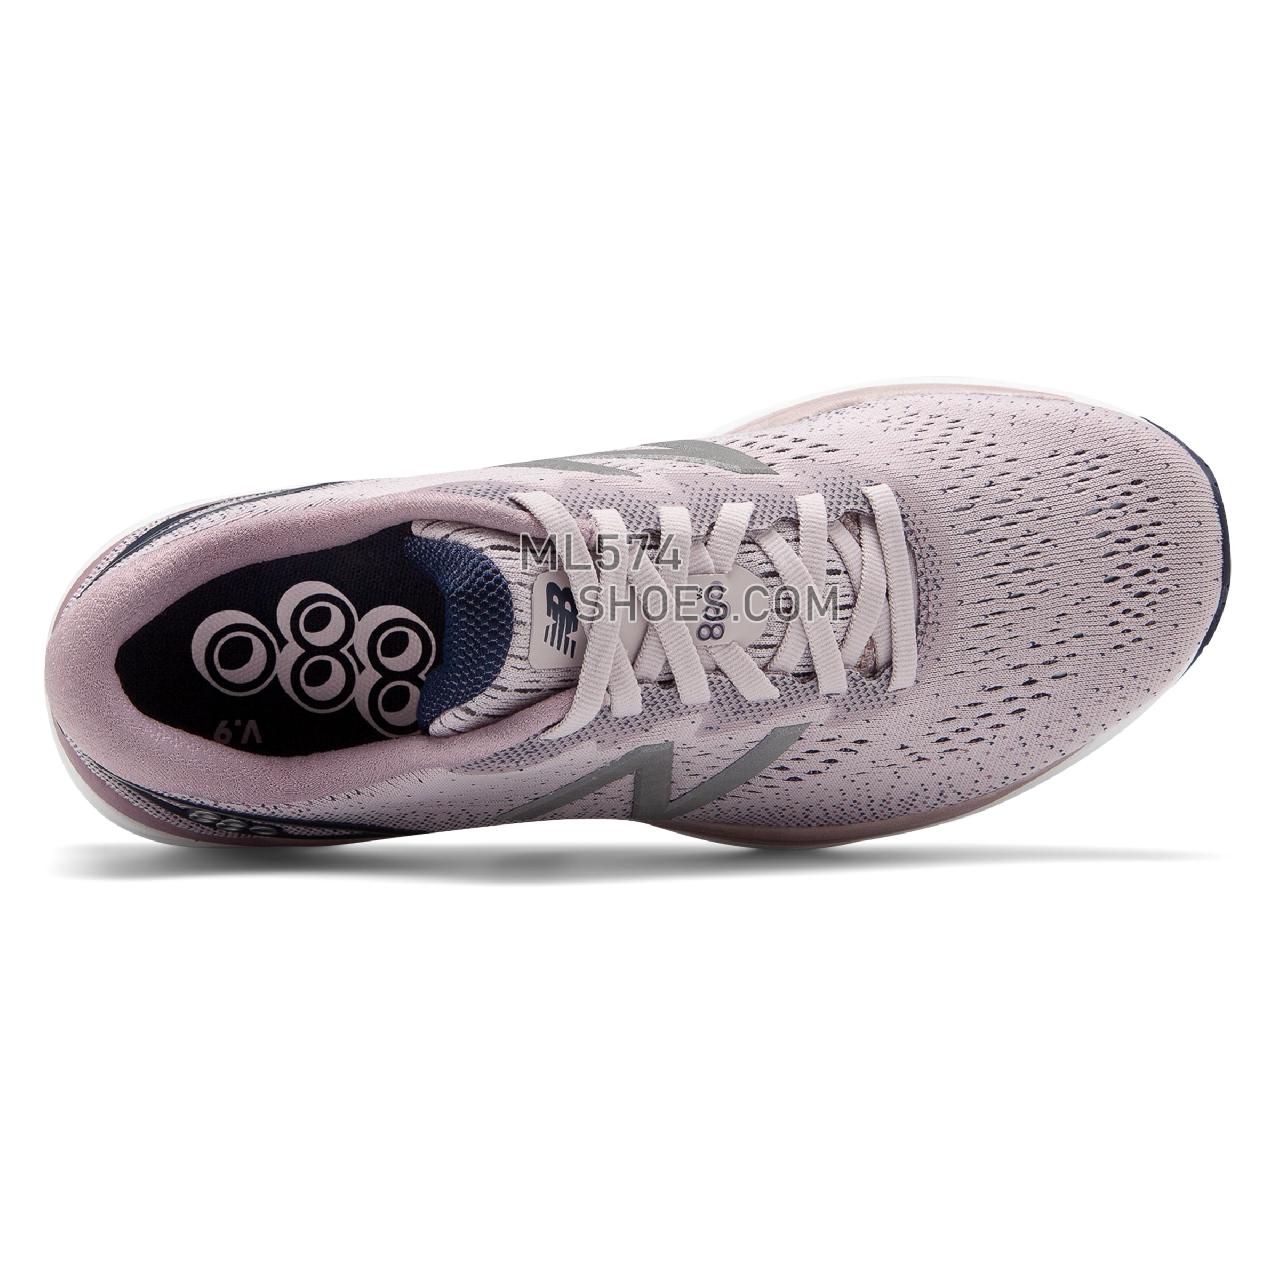 New Balance 880v9 - Women's 880v9 Running - Cashmere with Pink - W880CP9